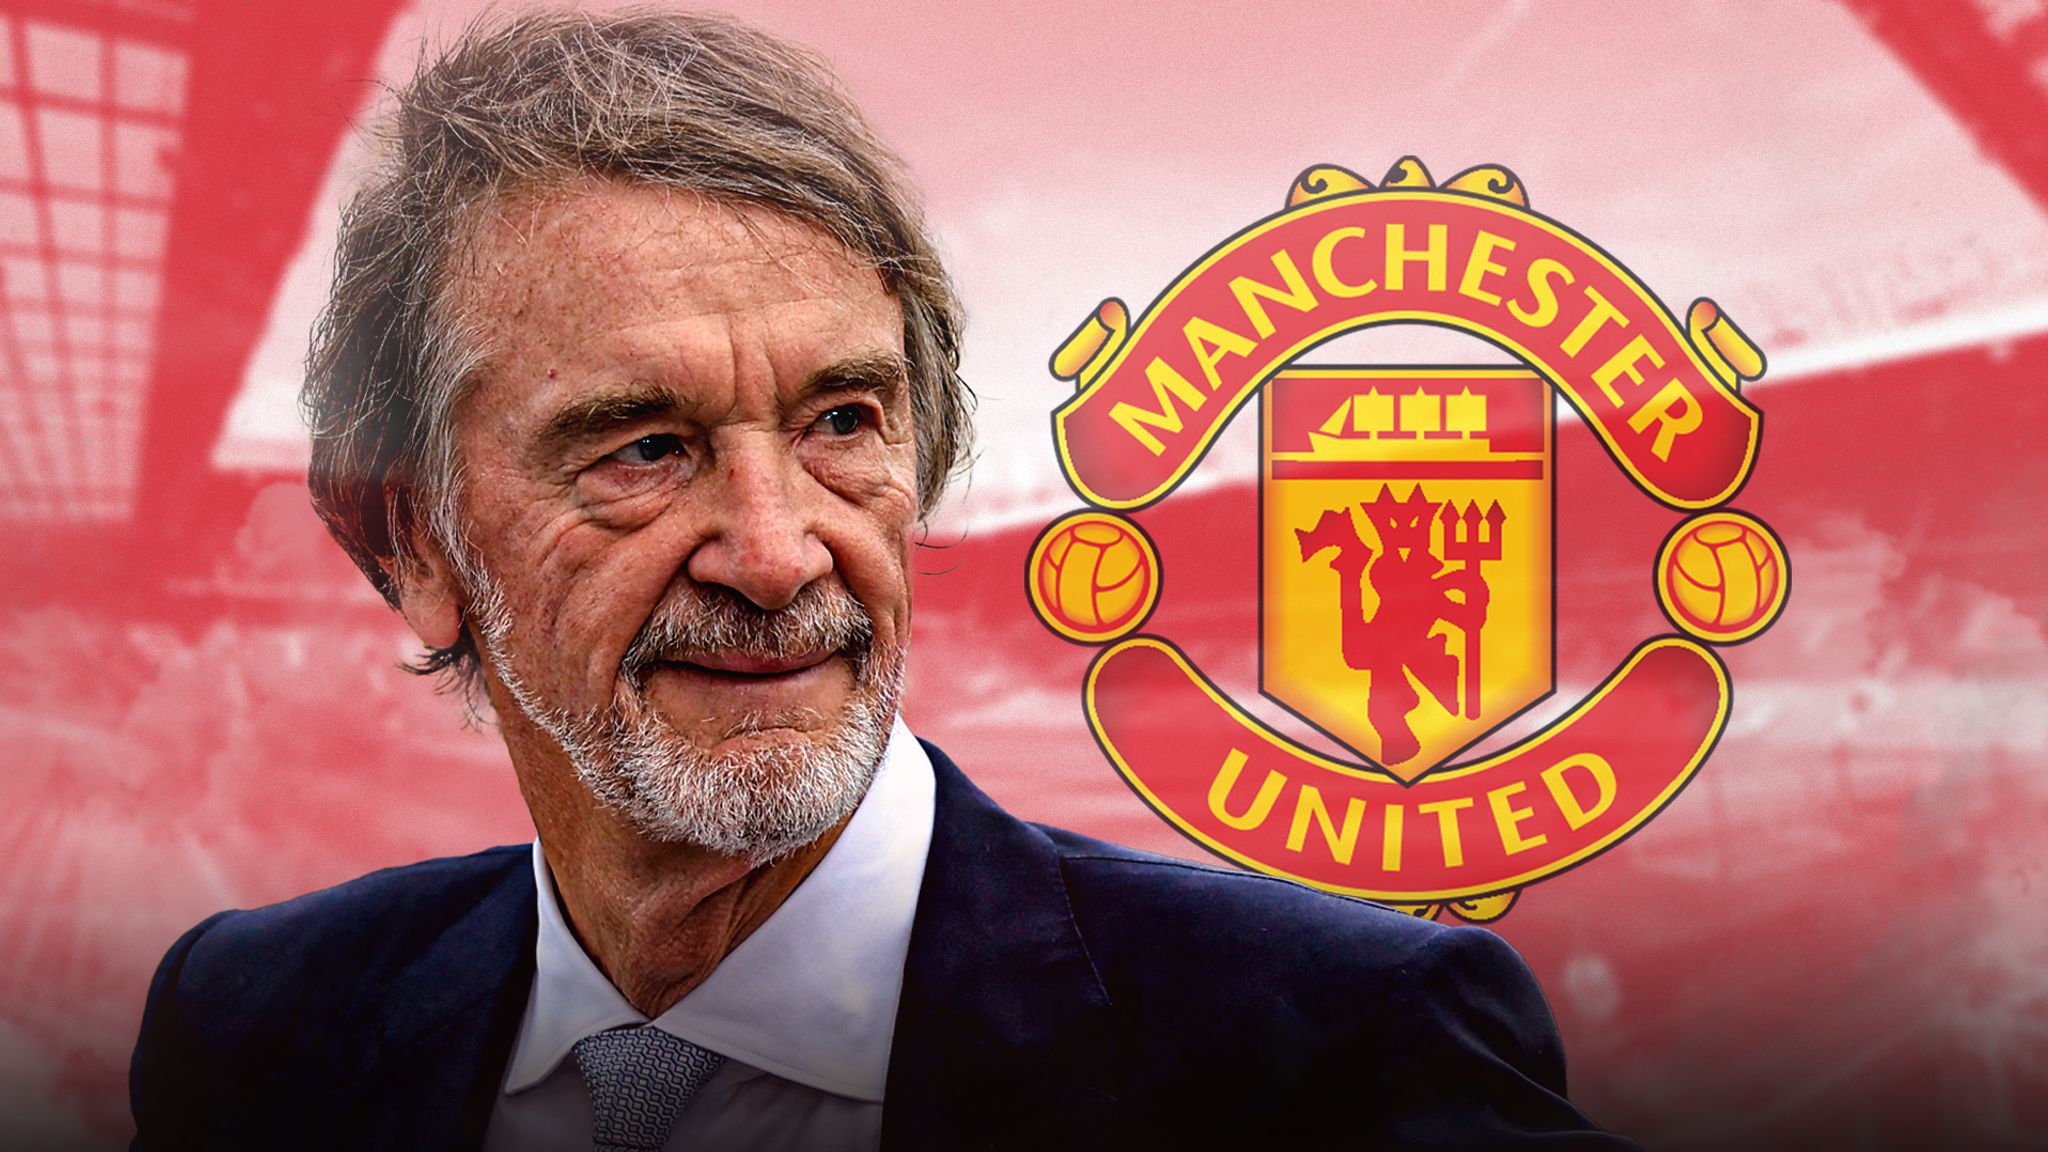 Sir Jim Ratcliffe, the new chief of Manchester United!